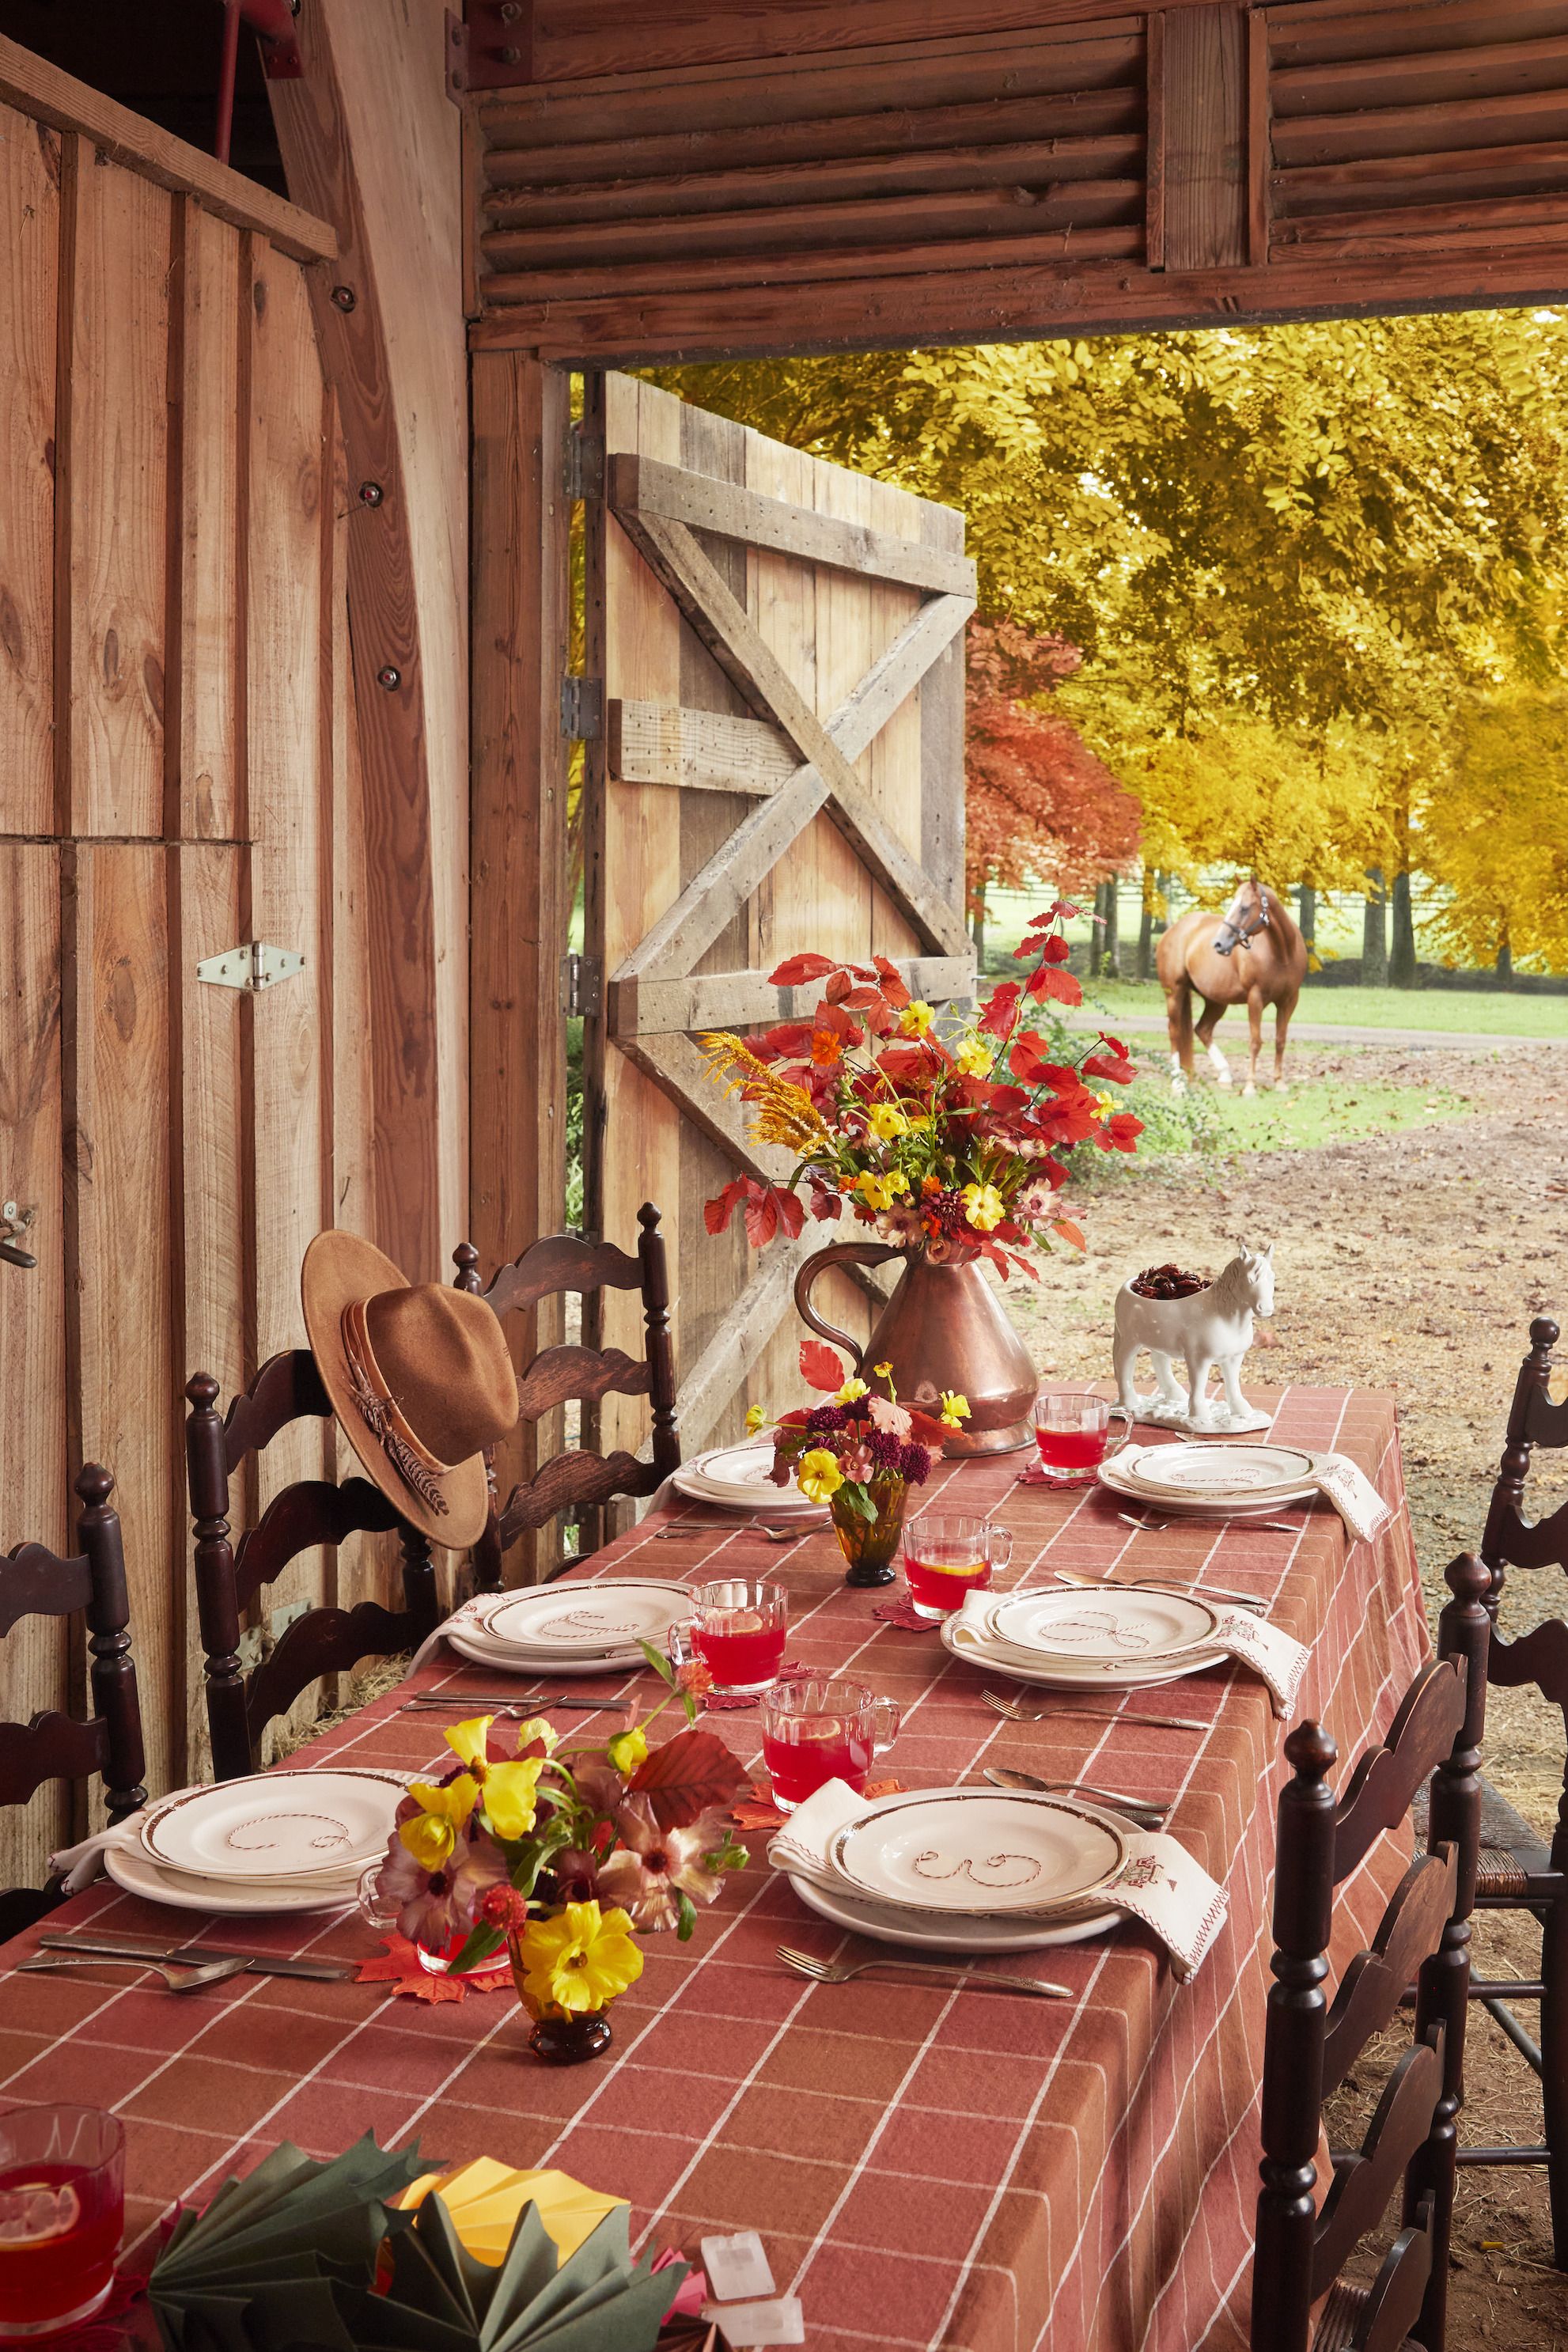 100+ Best Thanksgiving Ideas for Your Home 2022 - Decor, Table Ideas,  Cocktails, Food, and More